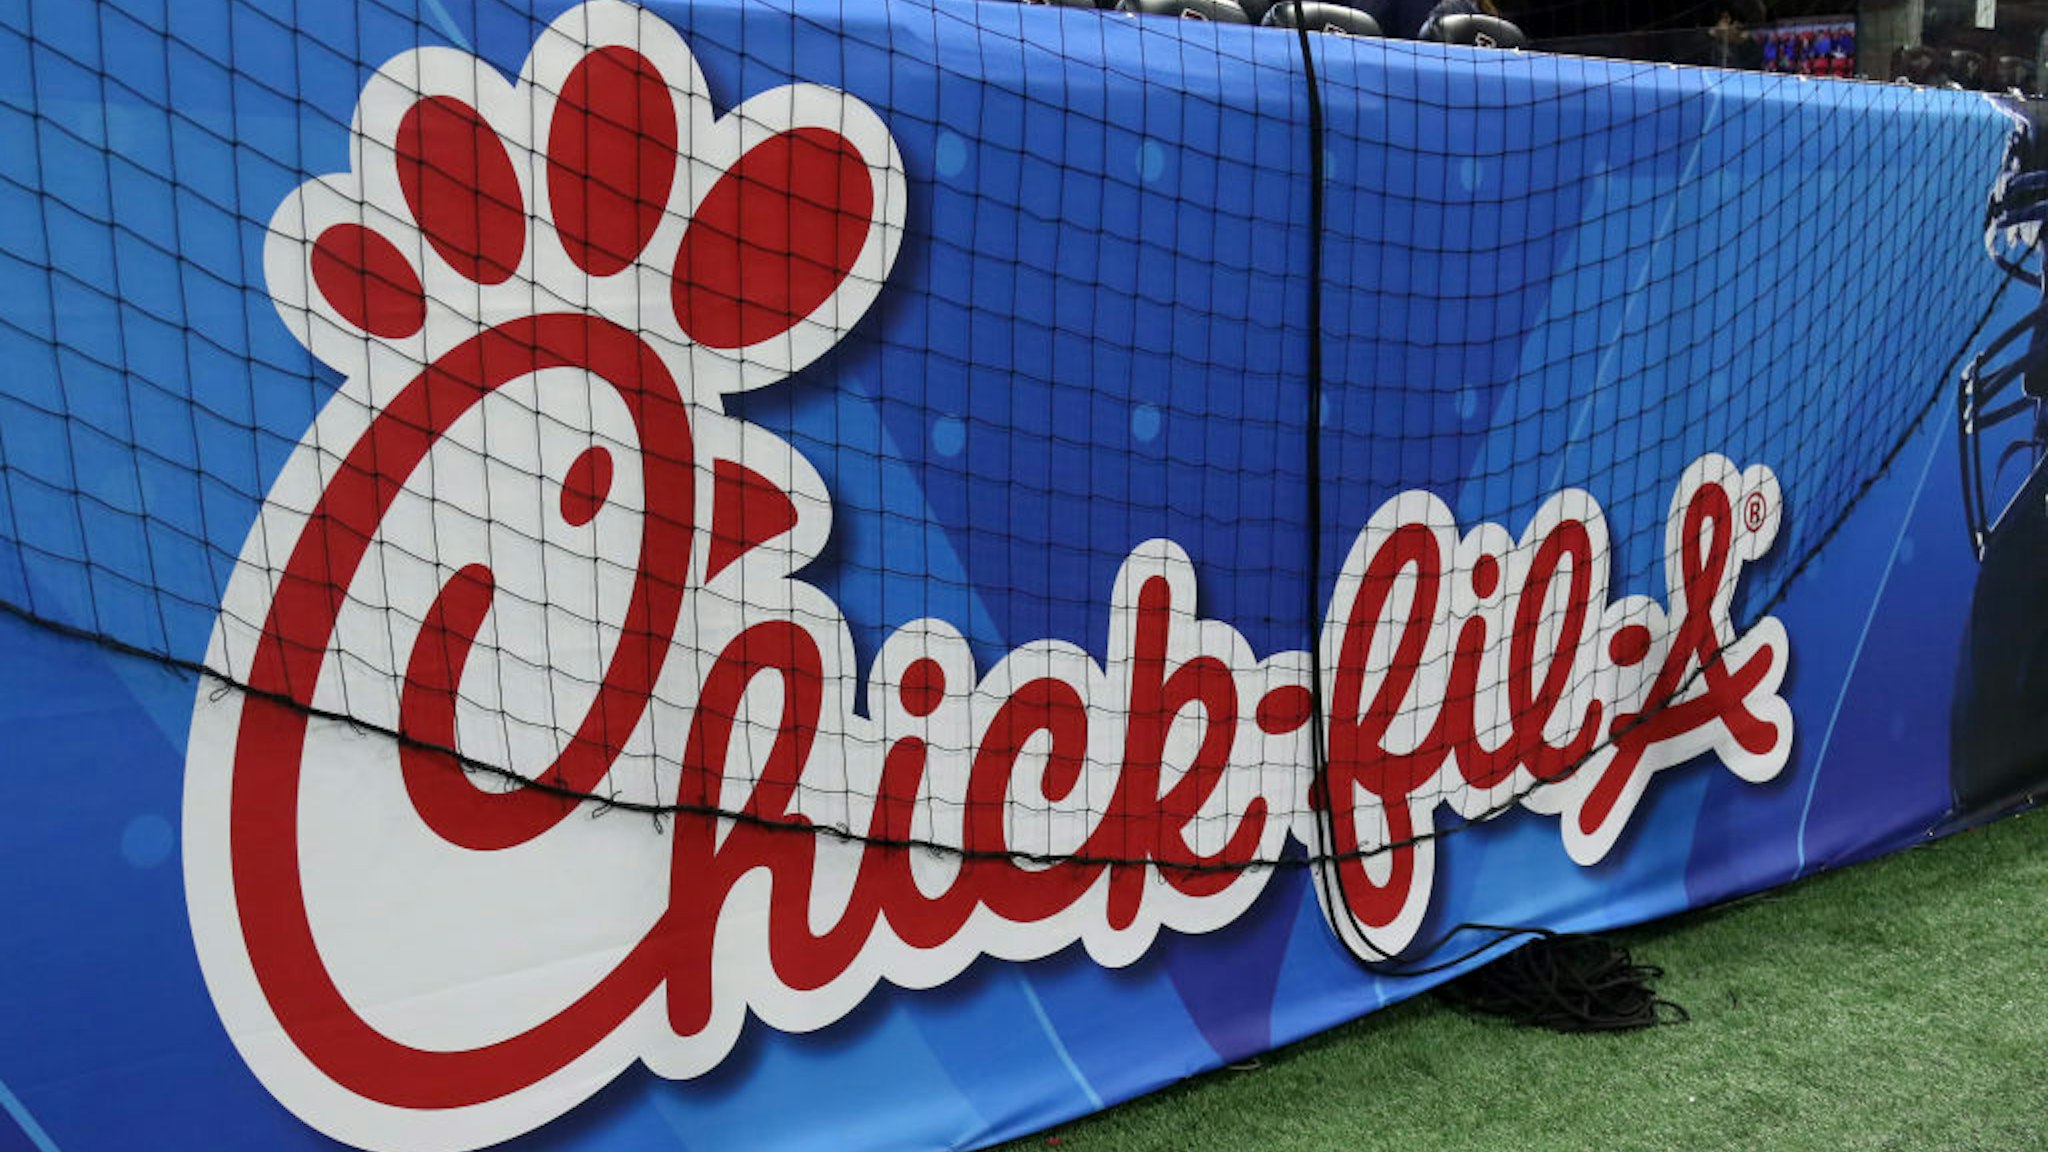 The Chick-fil-A logo is on display during the Peach Bowl between the Florida Gators and the Michigan Wolverines on December 29, 2018 at Mercedes-Benz Stadium in Atlanta, Georgia.